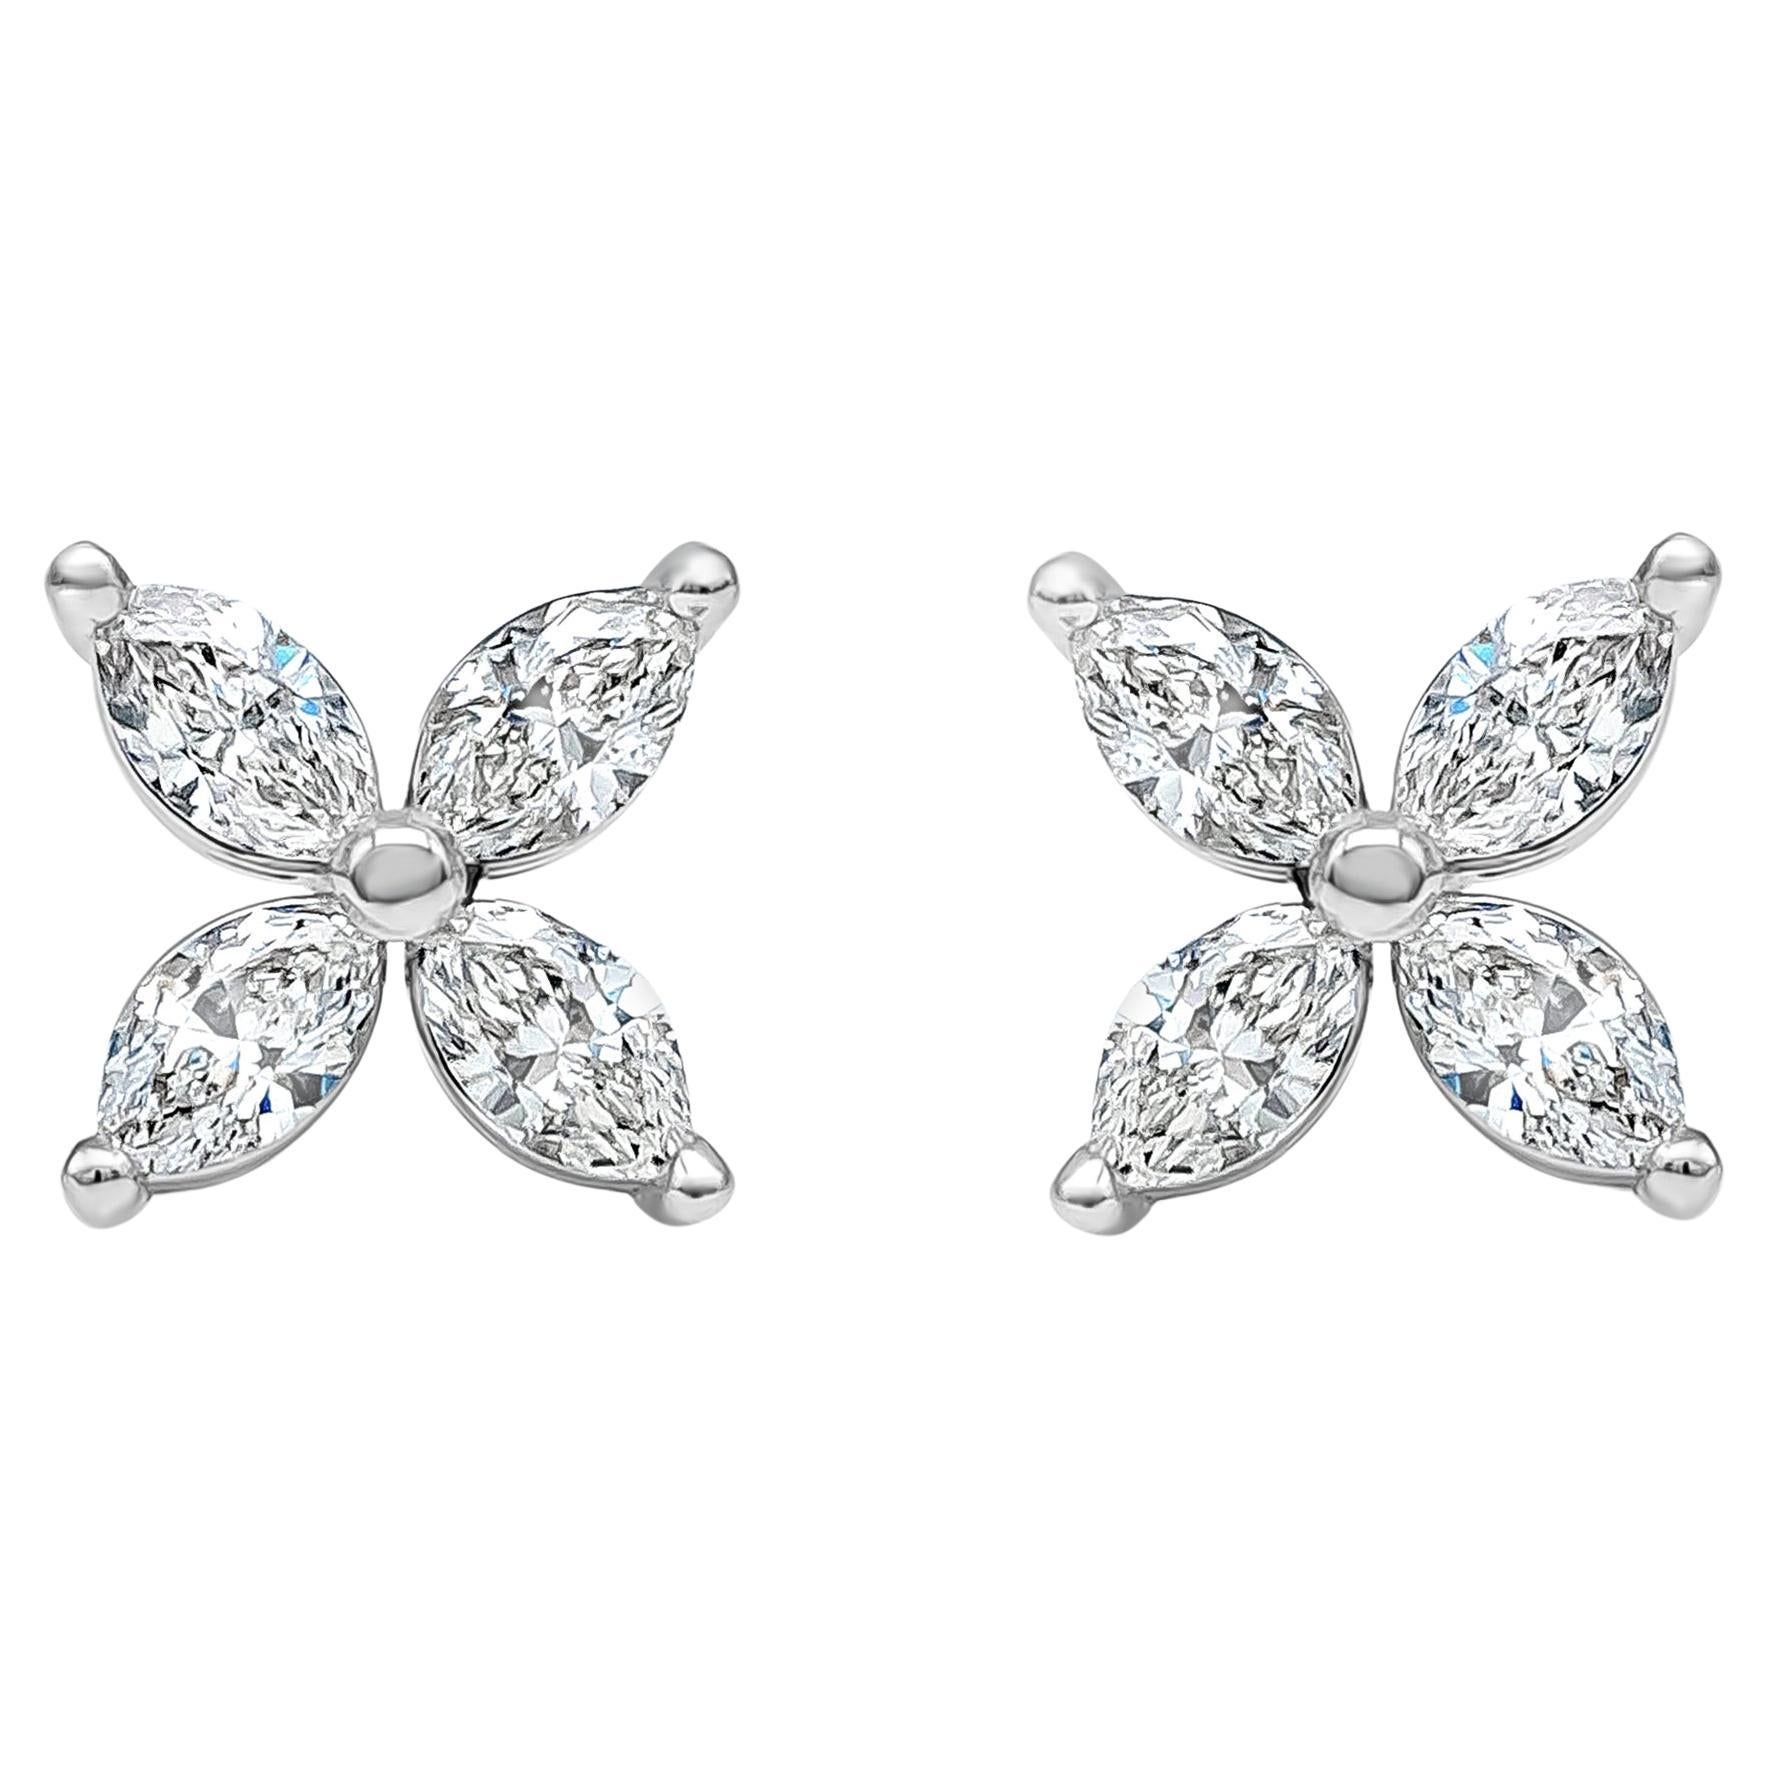 Marquise Cut Diamond Cluster Stud Earrings, 1.98 Carat Total For Sale